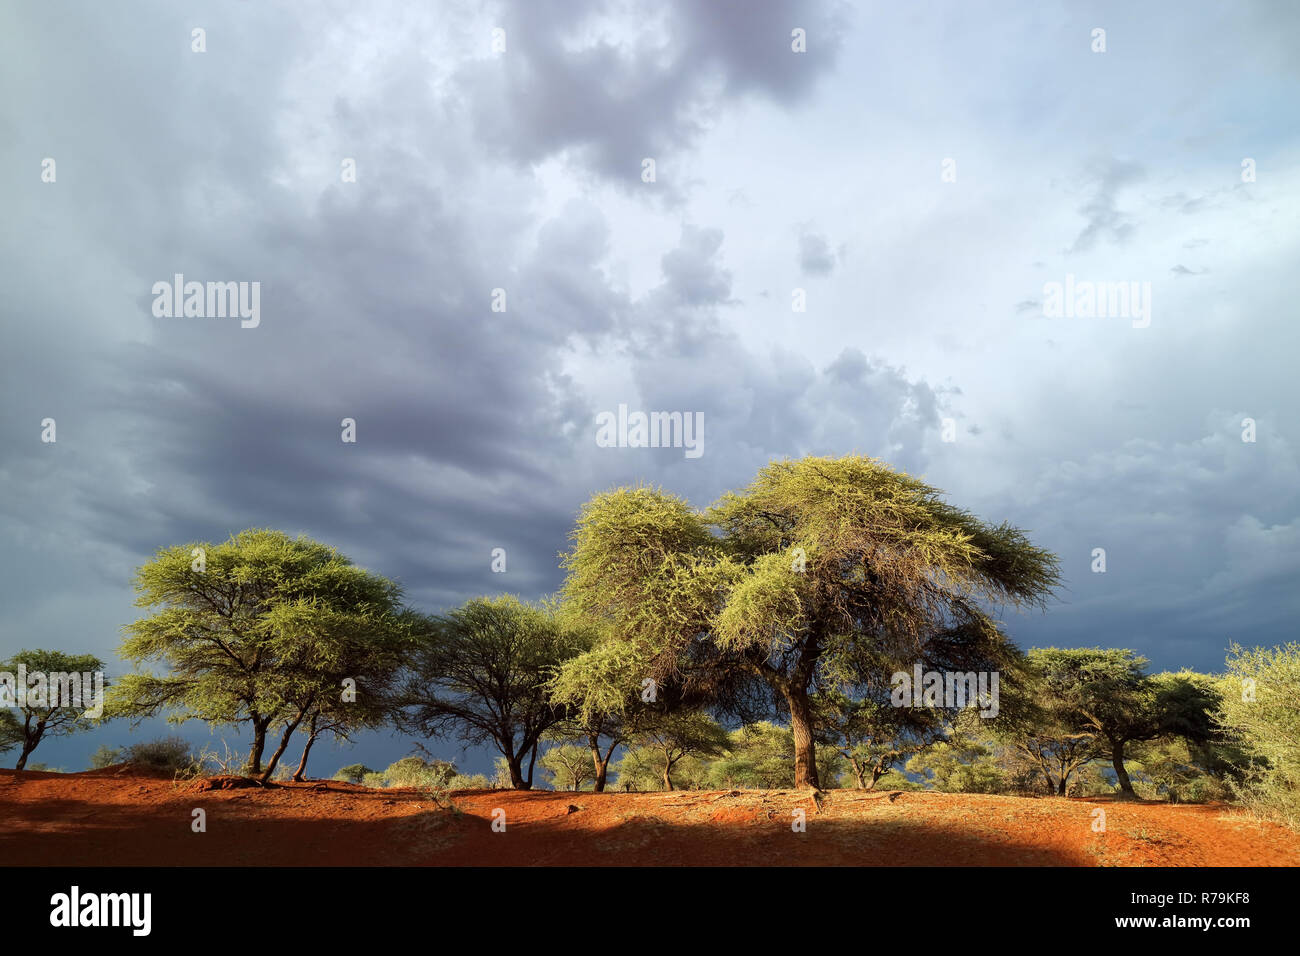 African landscape against a stormy sky Stock Photo